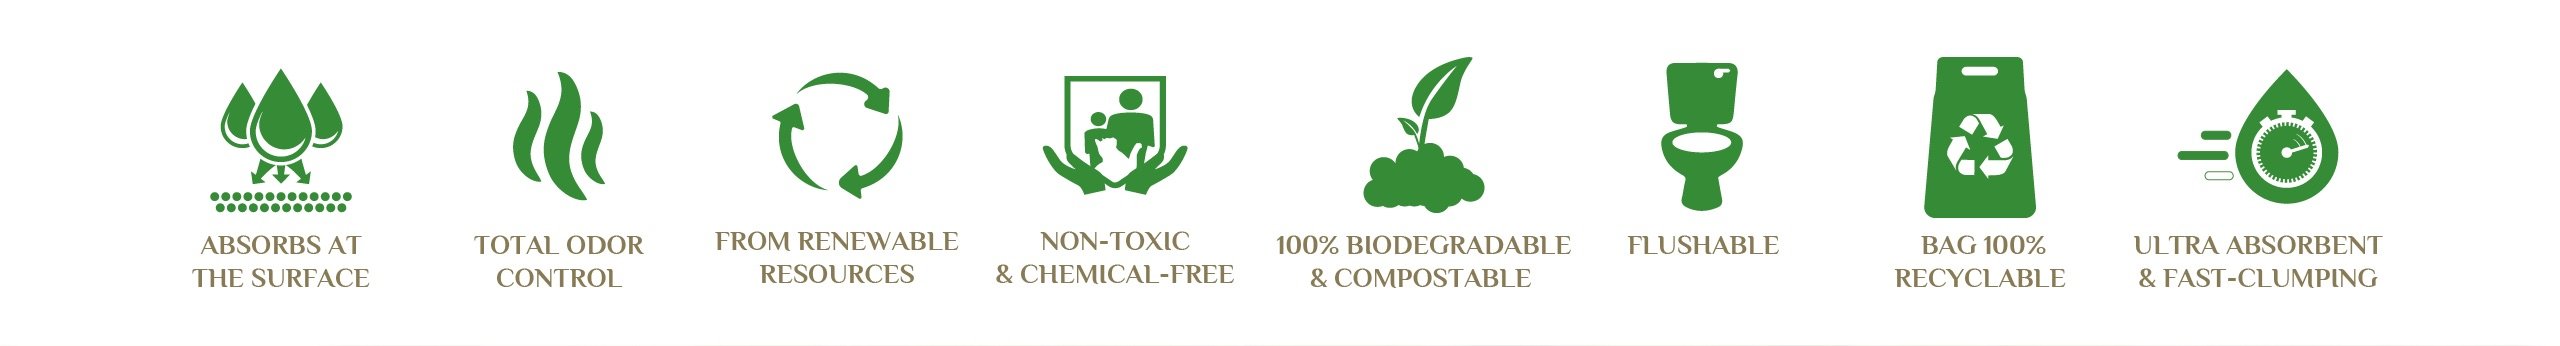 absorbs at the surface - total odor control - from renewable resources - non-toxic & chemical-free - 100% biodegradable & compostable - flushable - bag 100% recyclable - ultra absorbent & fast-clumping